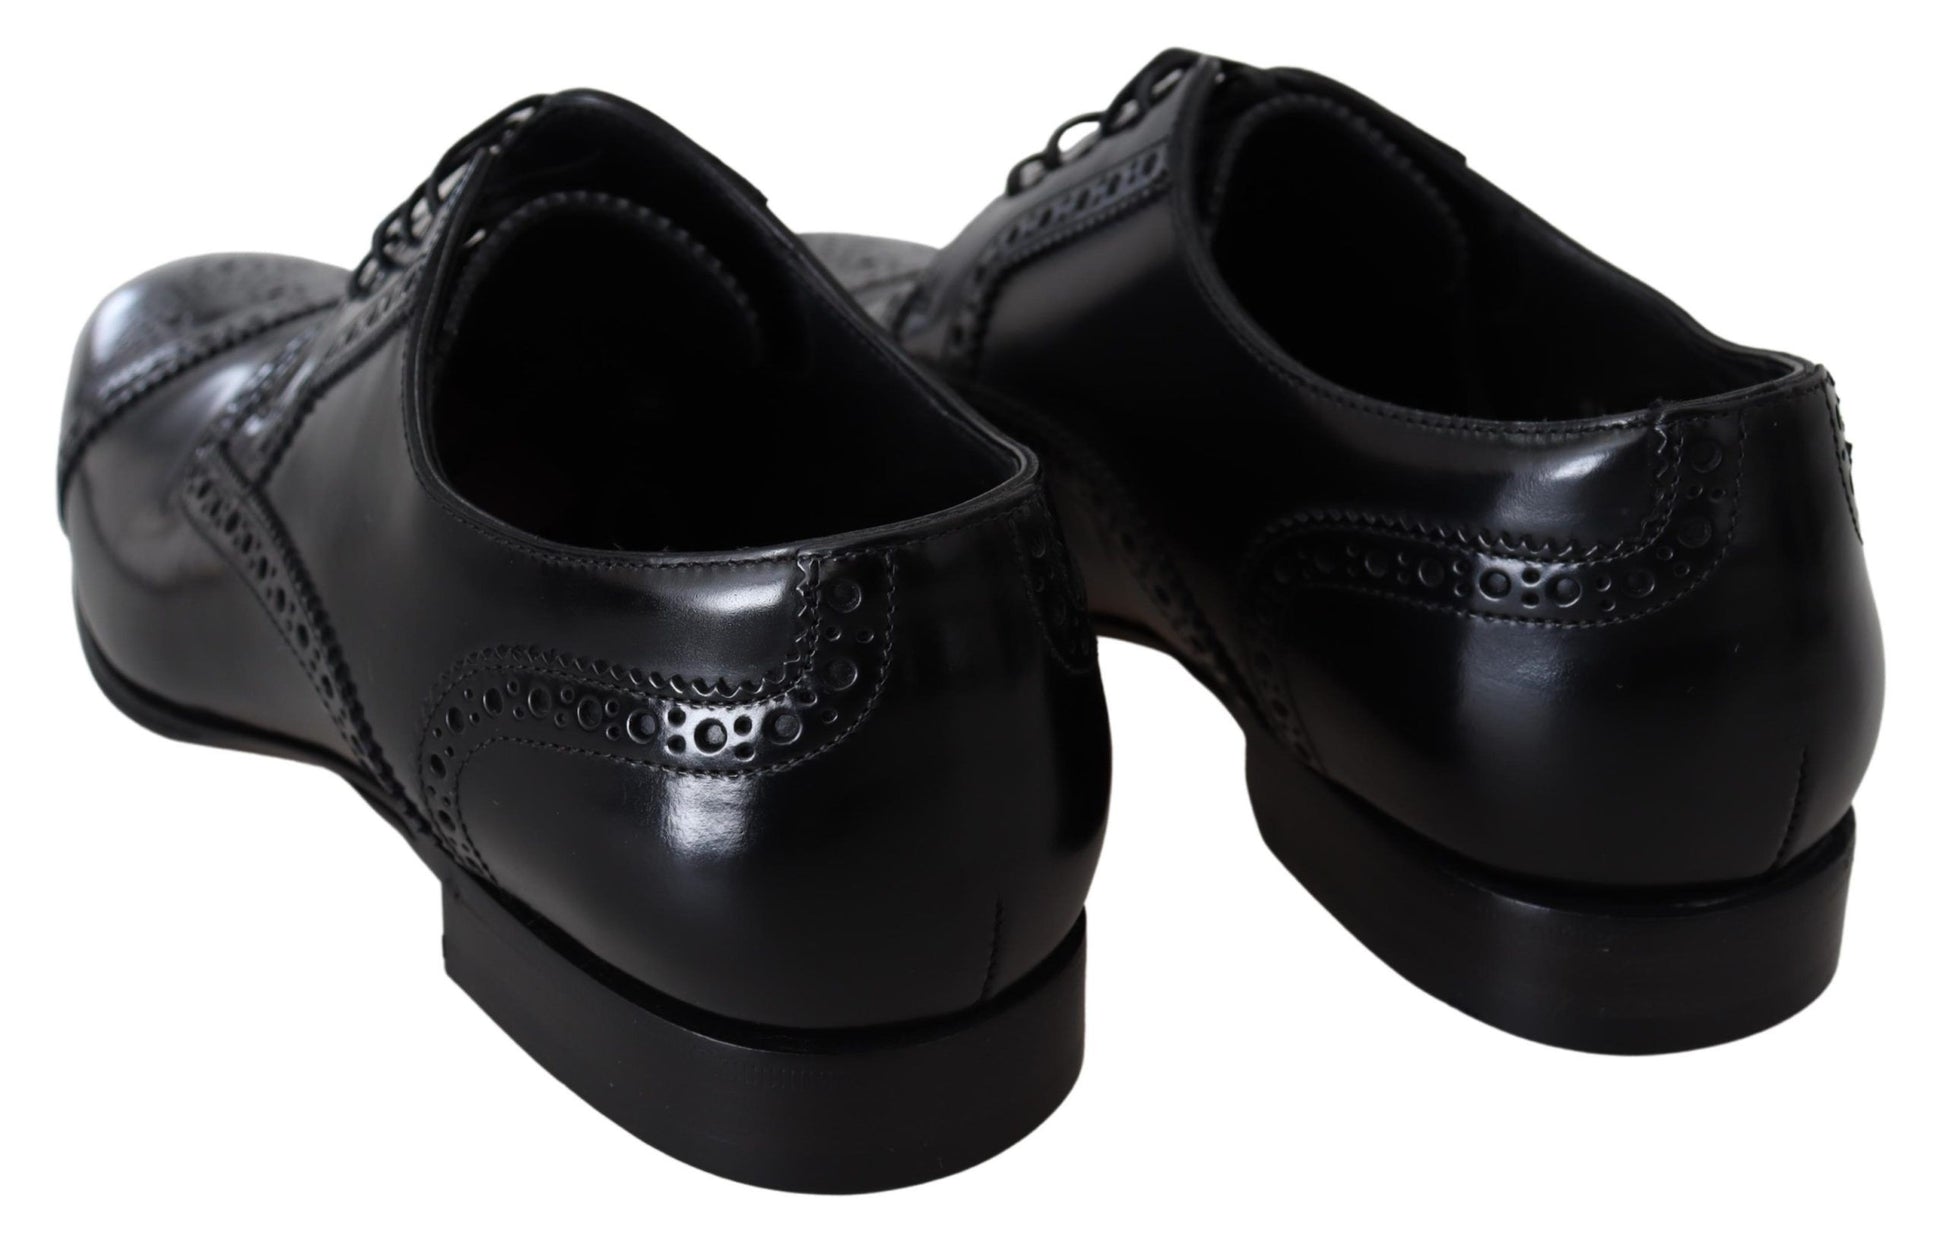 Black Leather Men Derby Formal Loafers Shoes - Designed by Dolce & Gabbana Available to Buy at a Discounted Price on Moon Behind The Hill Online Designer Discount Store